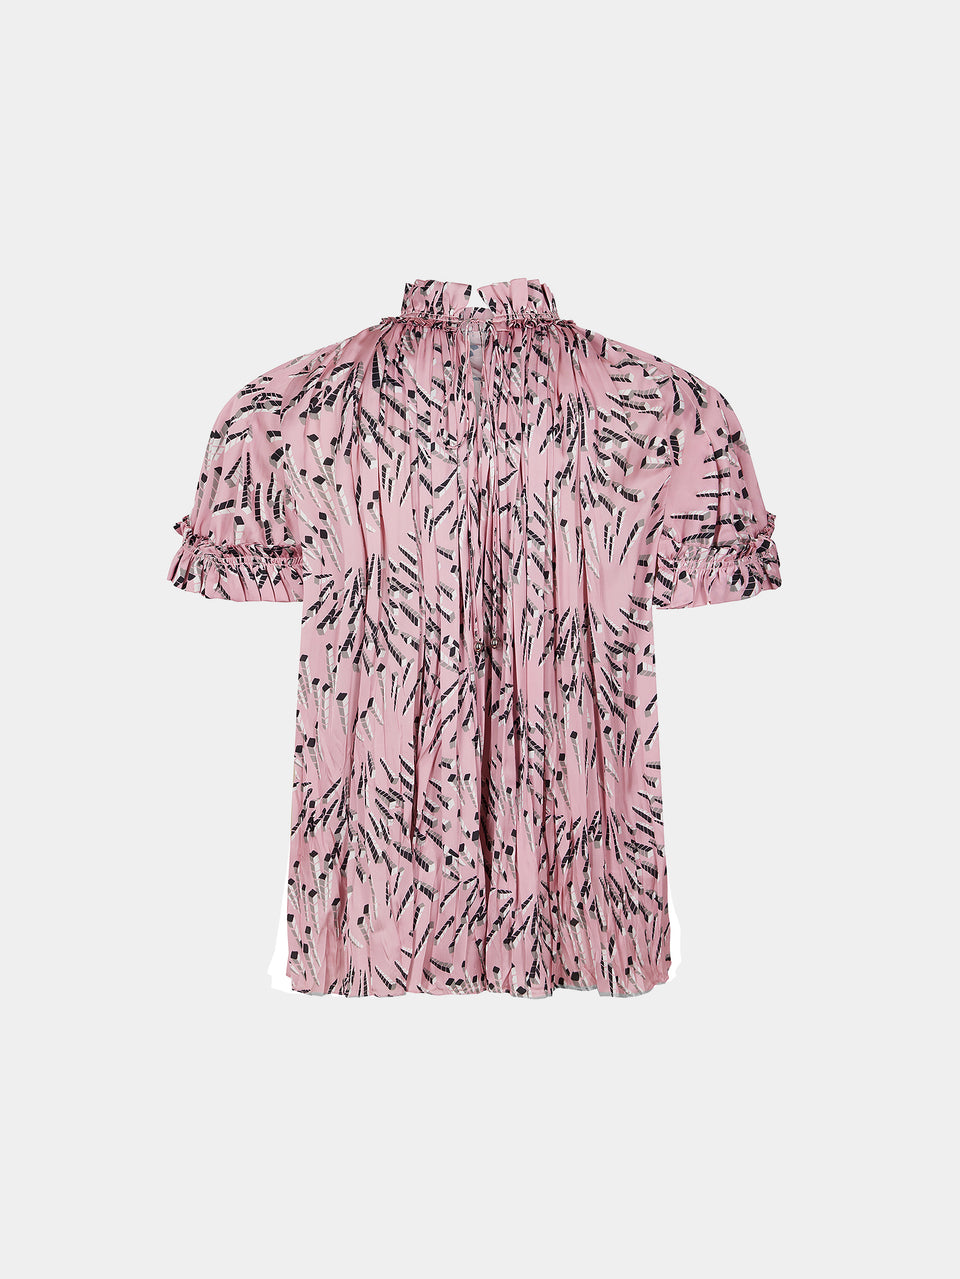 Pleated Pink Top with Patterns